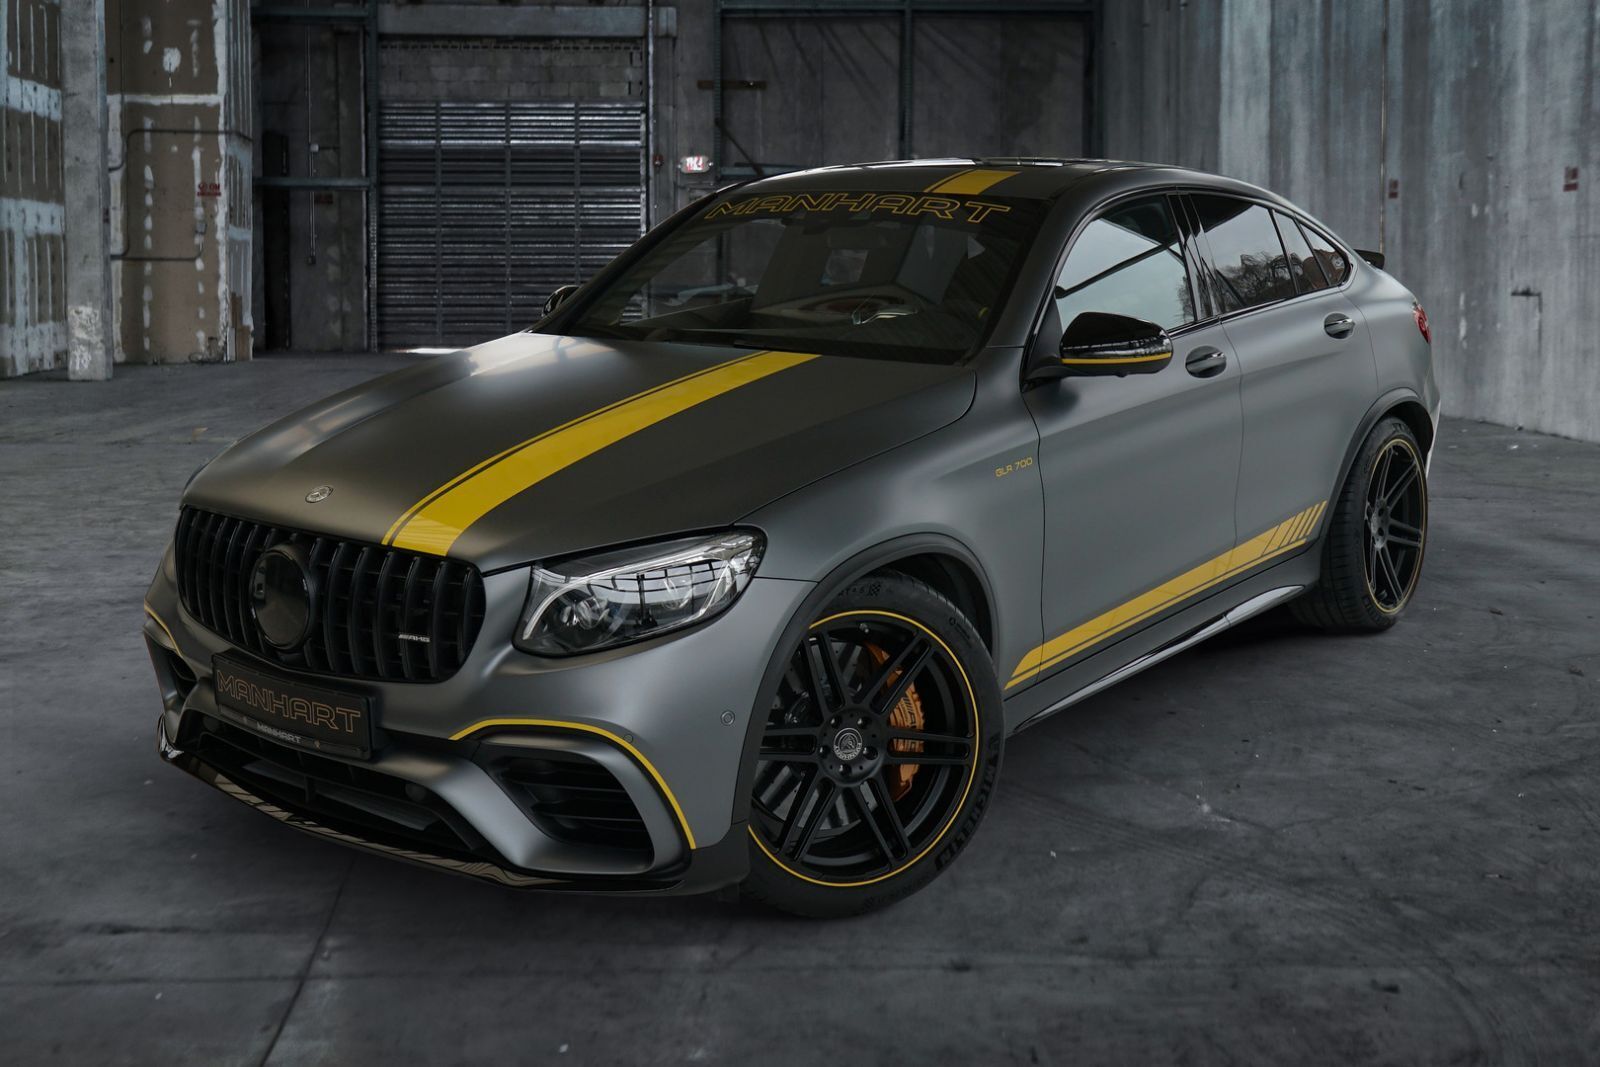 Mercedes-AMG GLC 63 S Coupe